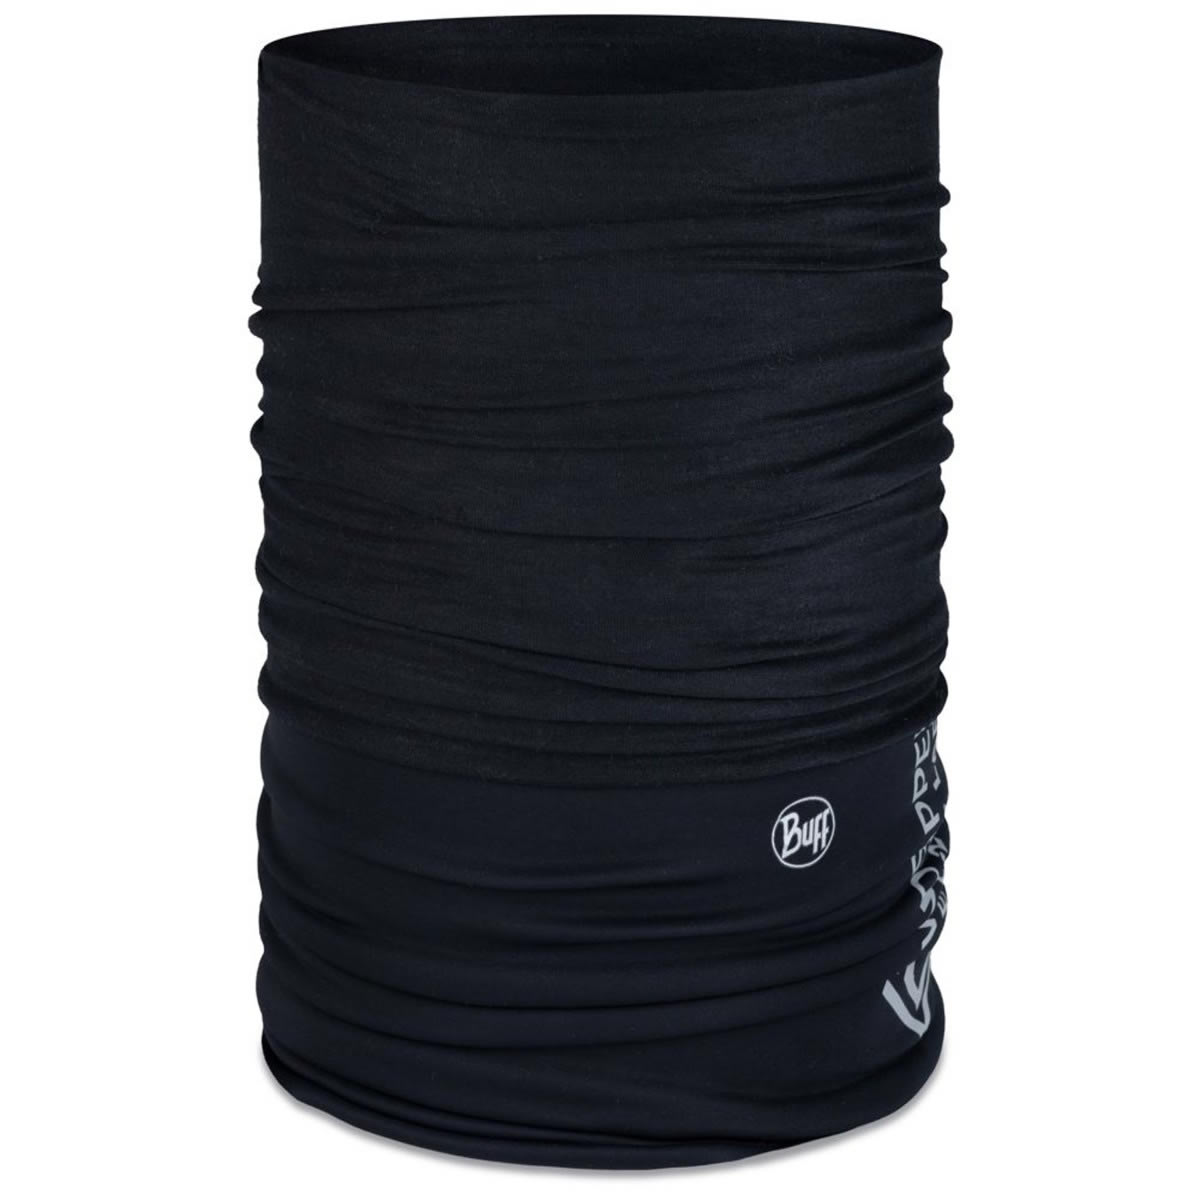 Buff Schlauchtuch Windproof, Solid Black